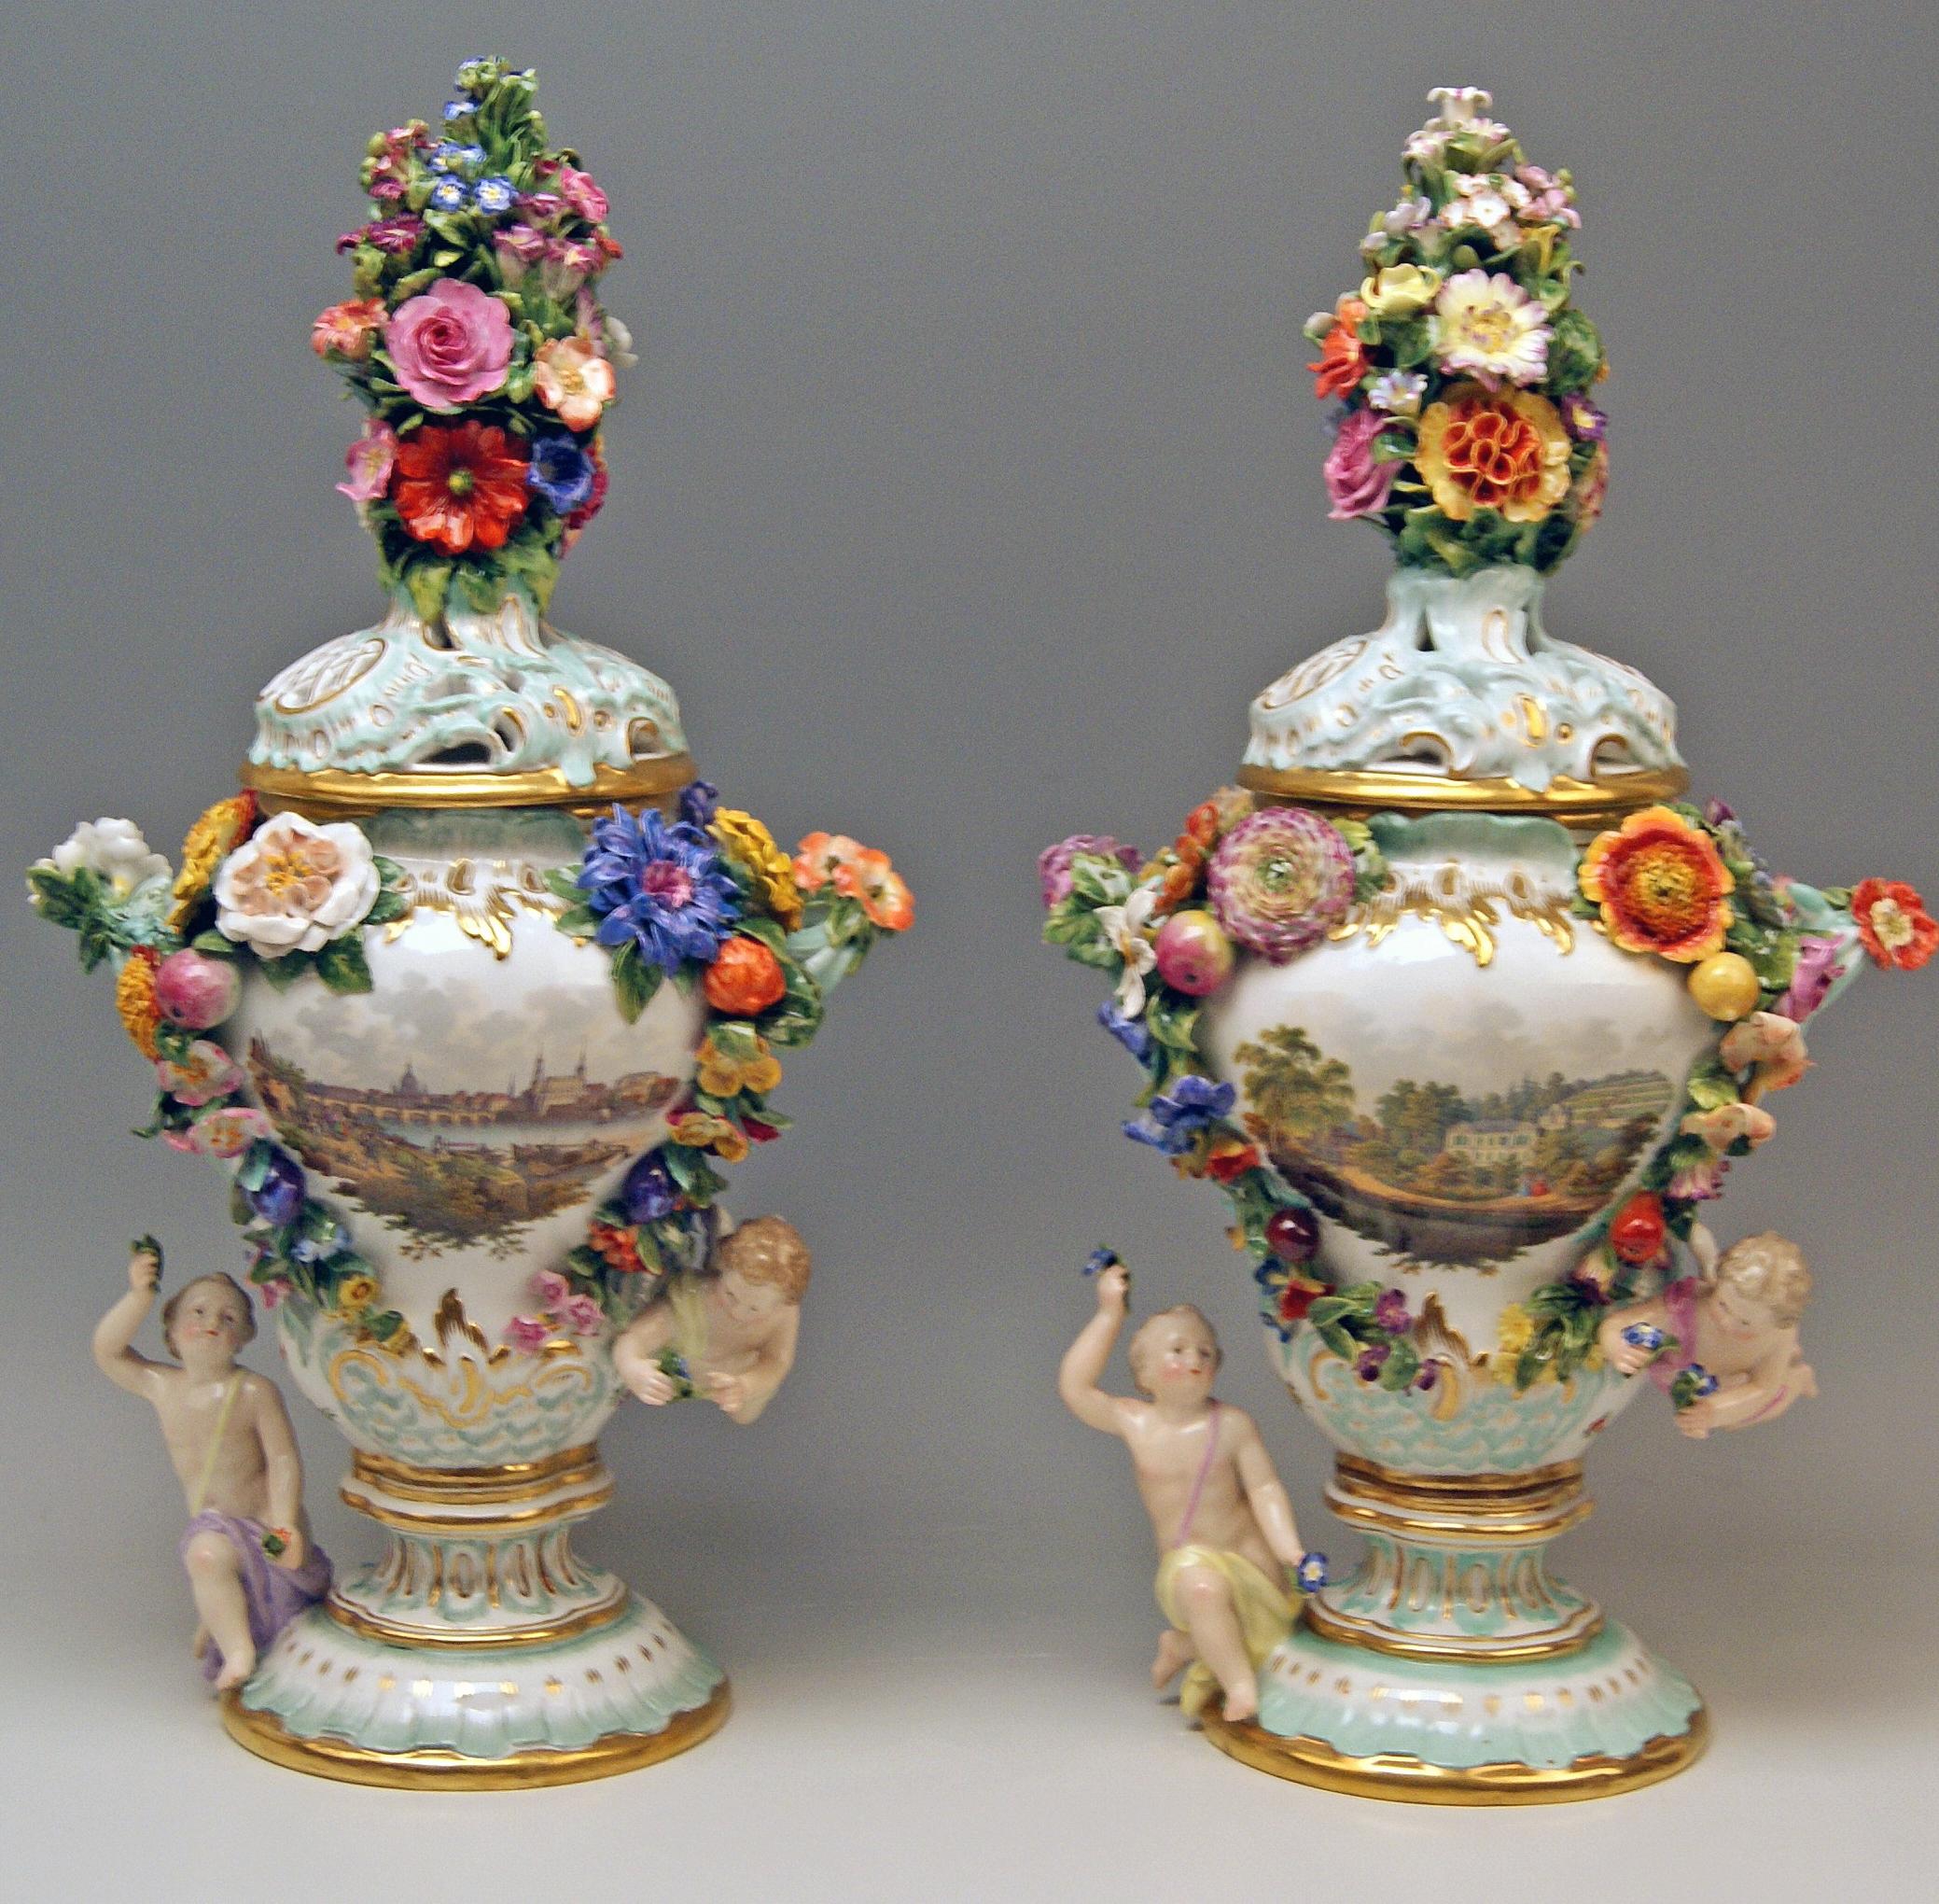 Meissen gorgeous quite rare items:
A Pair of Potpourri Lidded Vases with abundantly sculptured decorations as well as with stunning topographical pictures and nicest flower paintings.

Manufactory: Meissen
Hallmarked:  Blue Meissen Sword Mark 